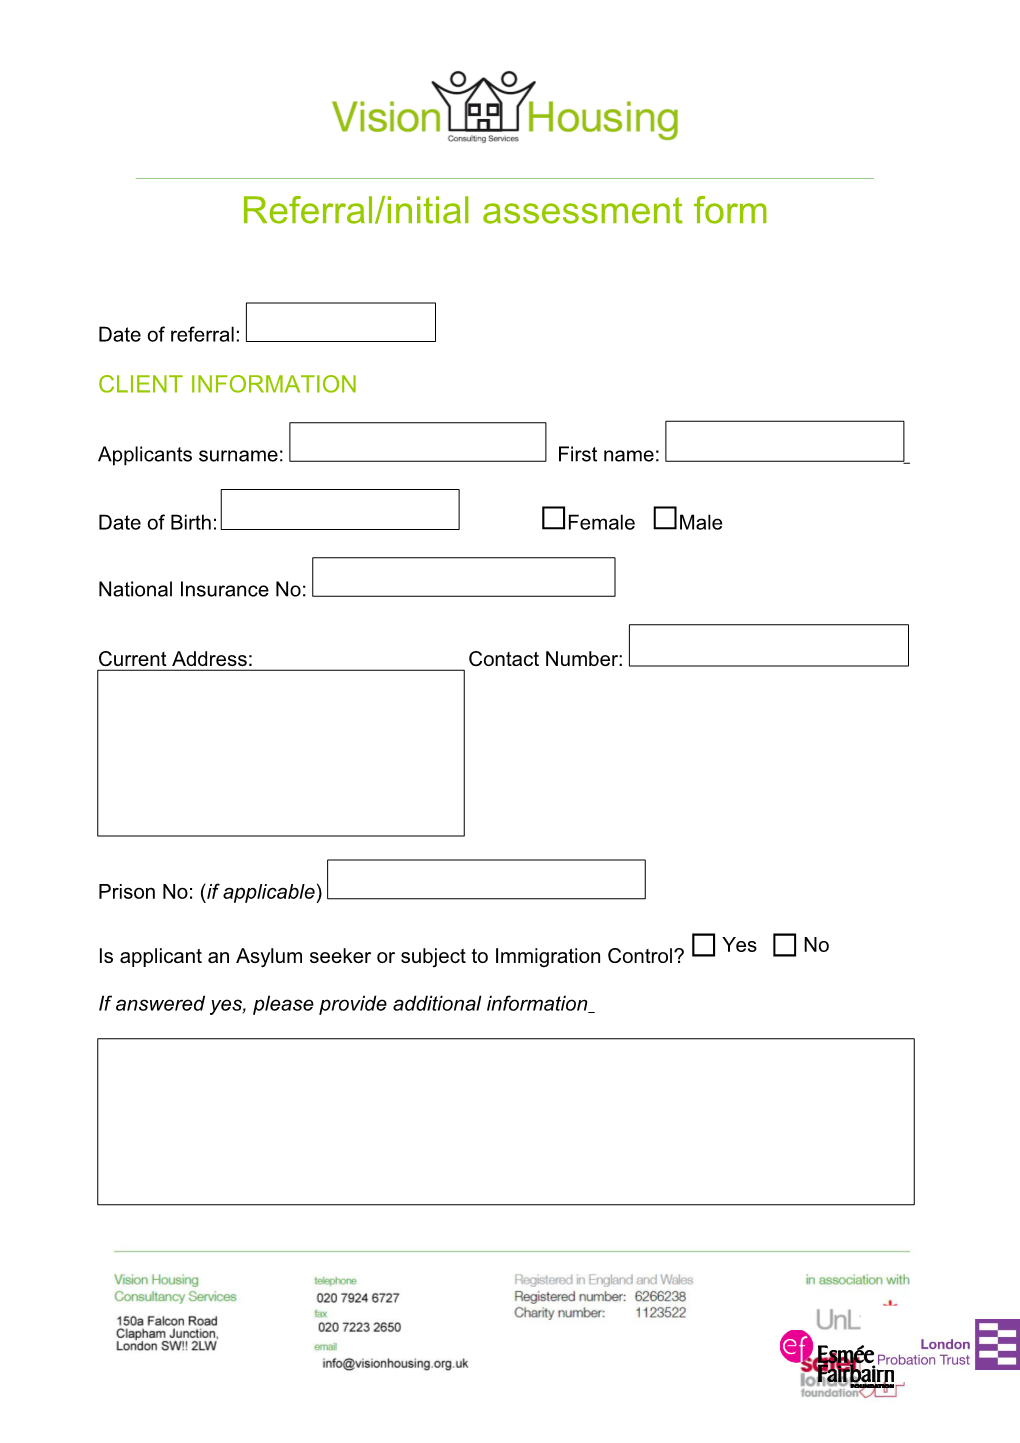 Referral/Initial Assessment Form